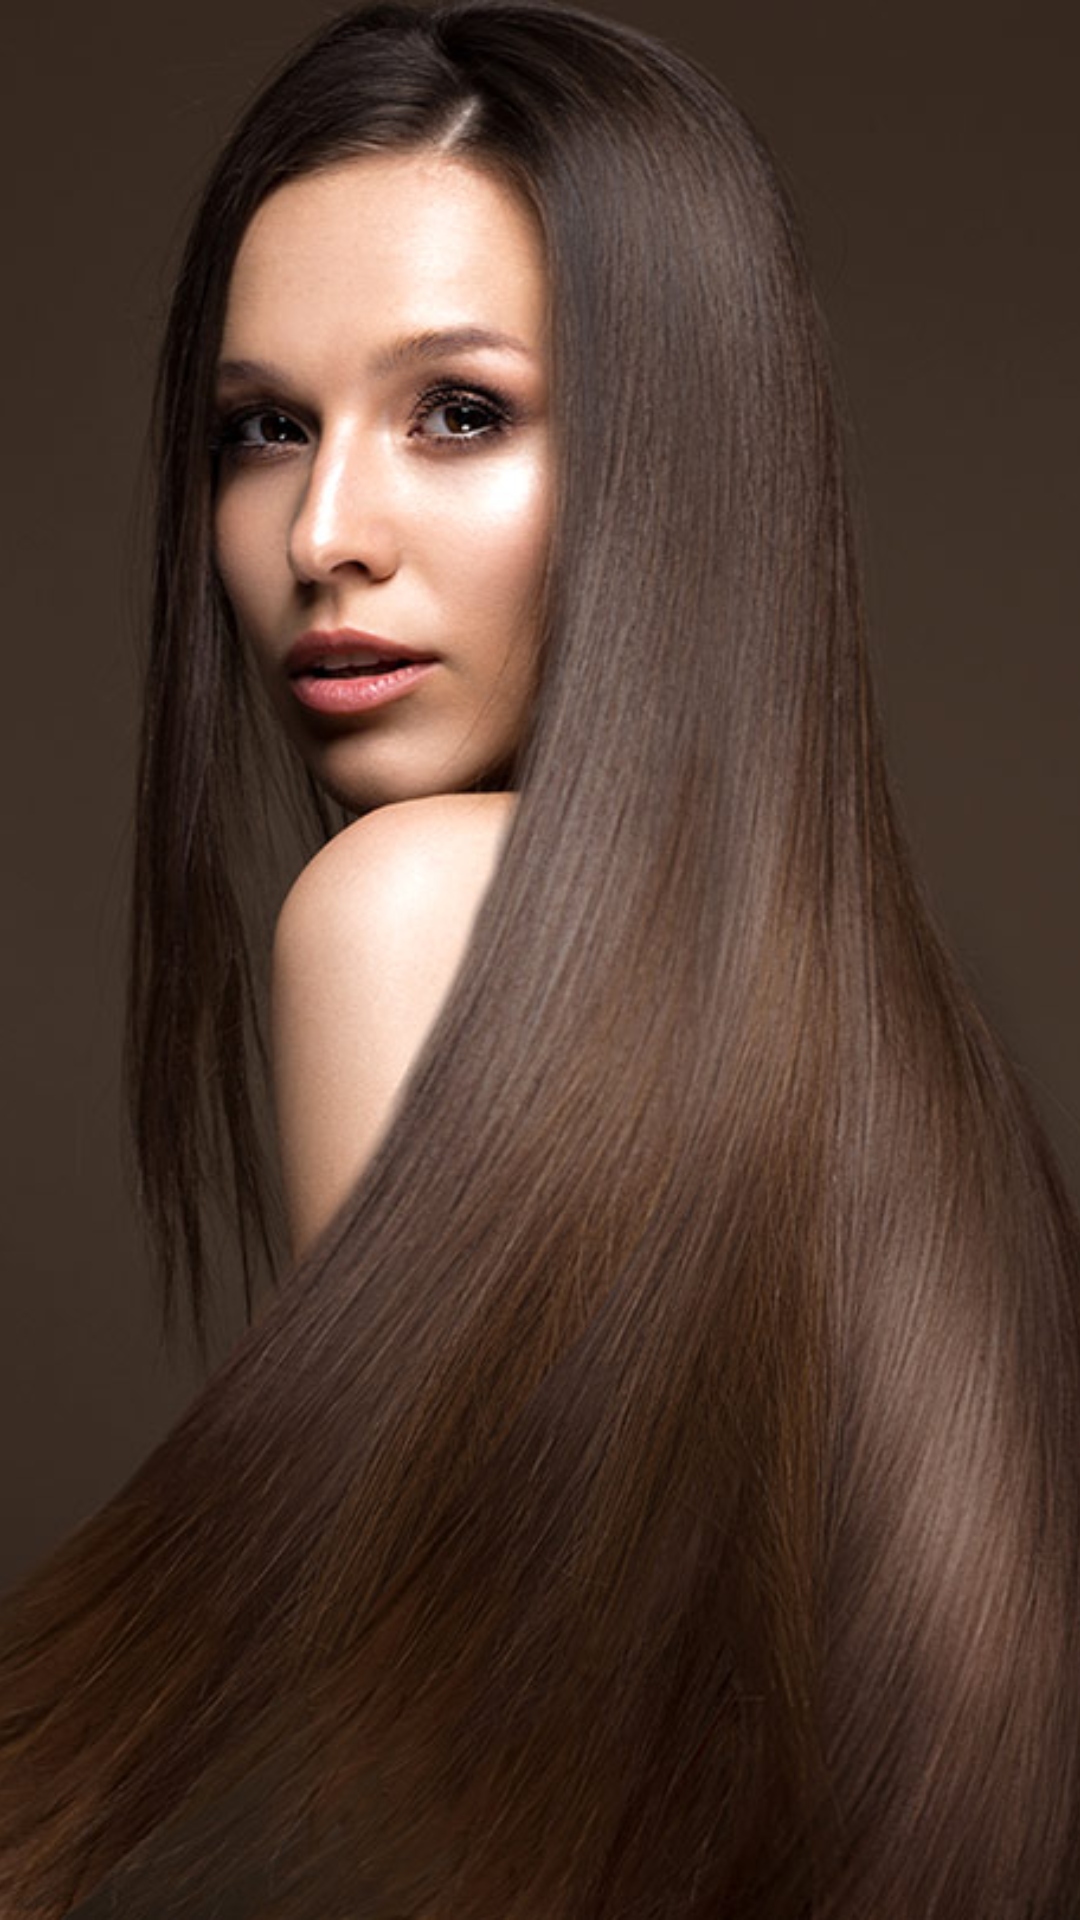  5 tips to get salon-like shiny hair at home